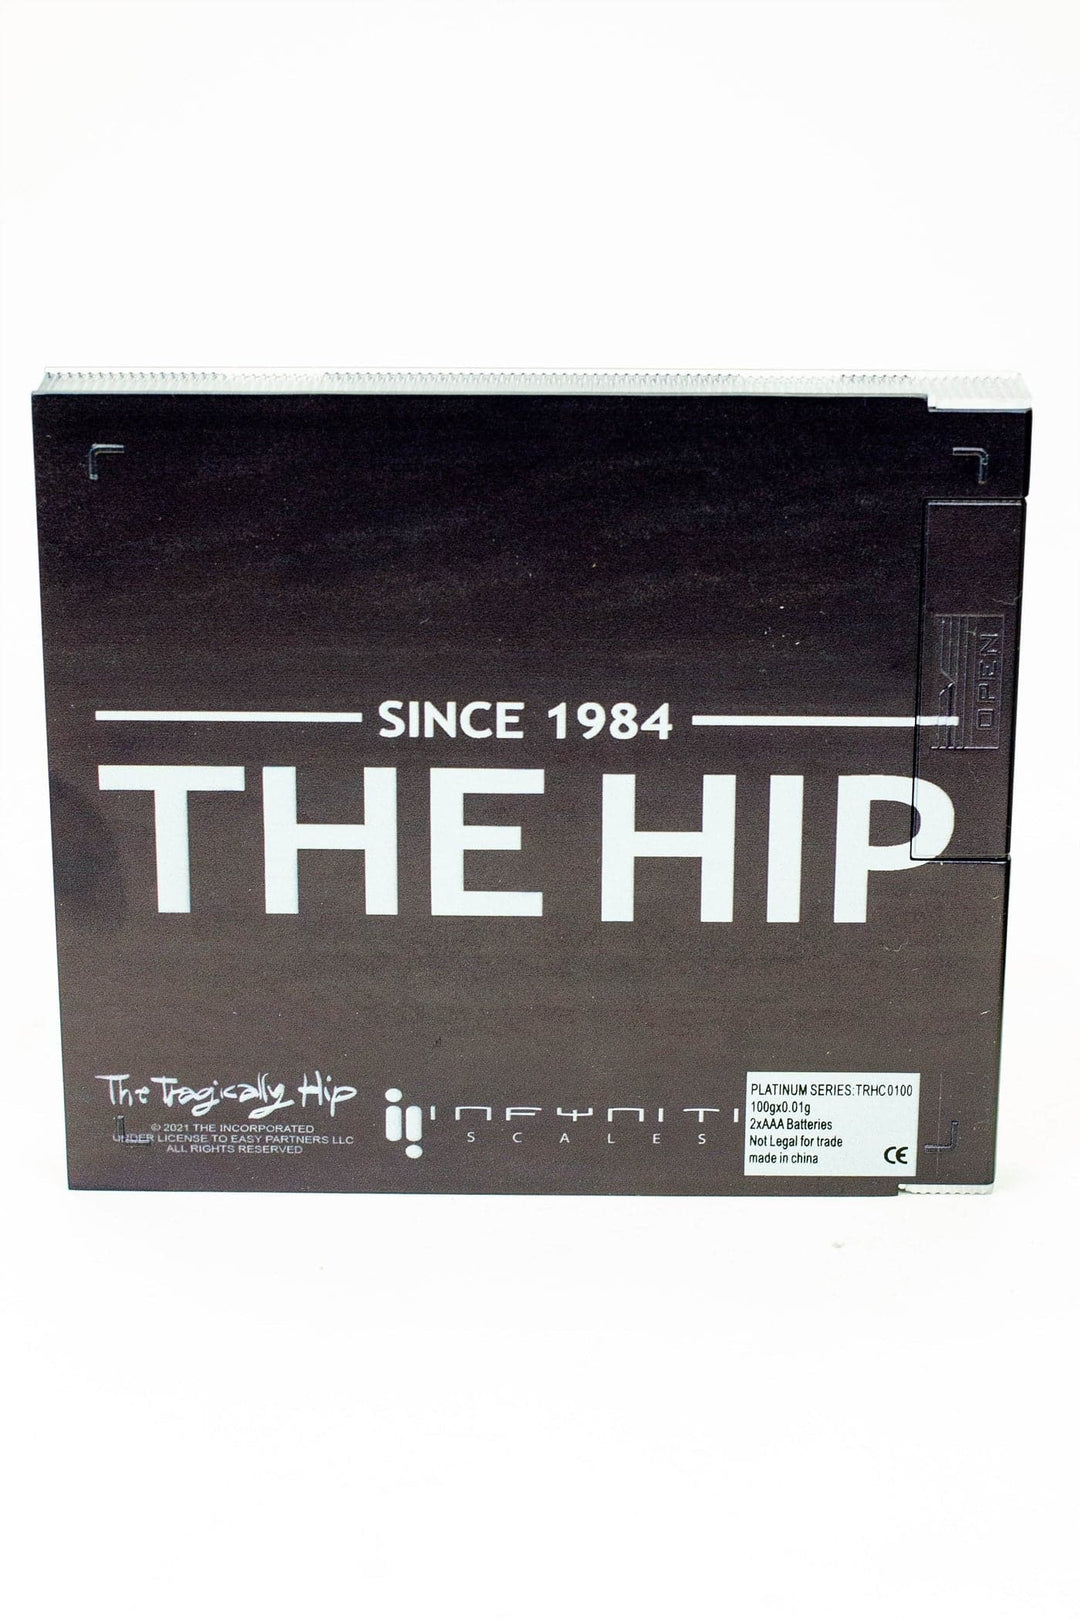 The tragically hip scale_3